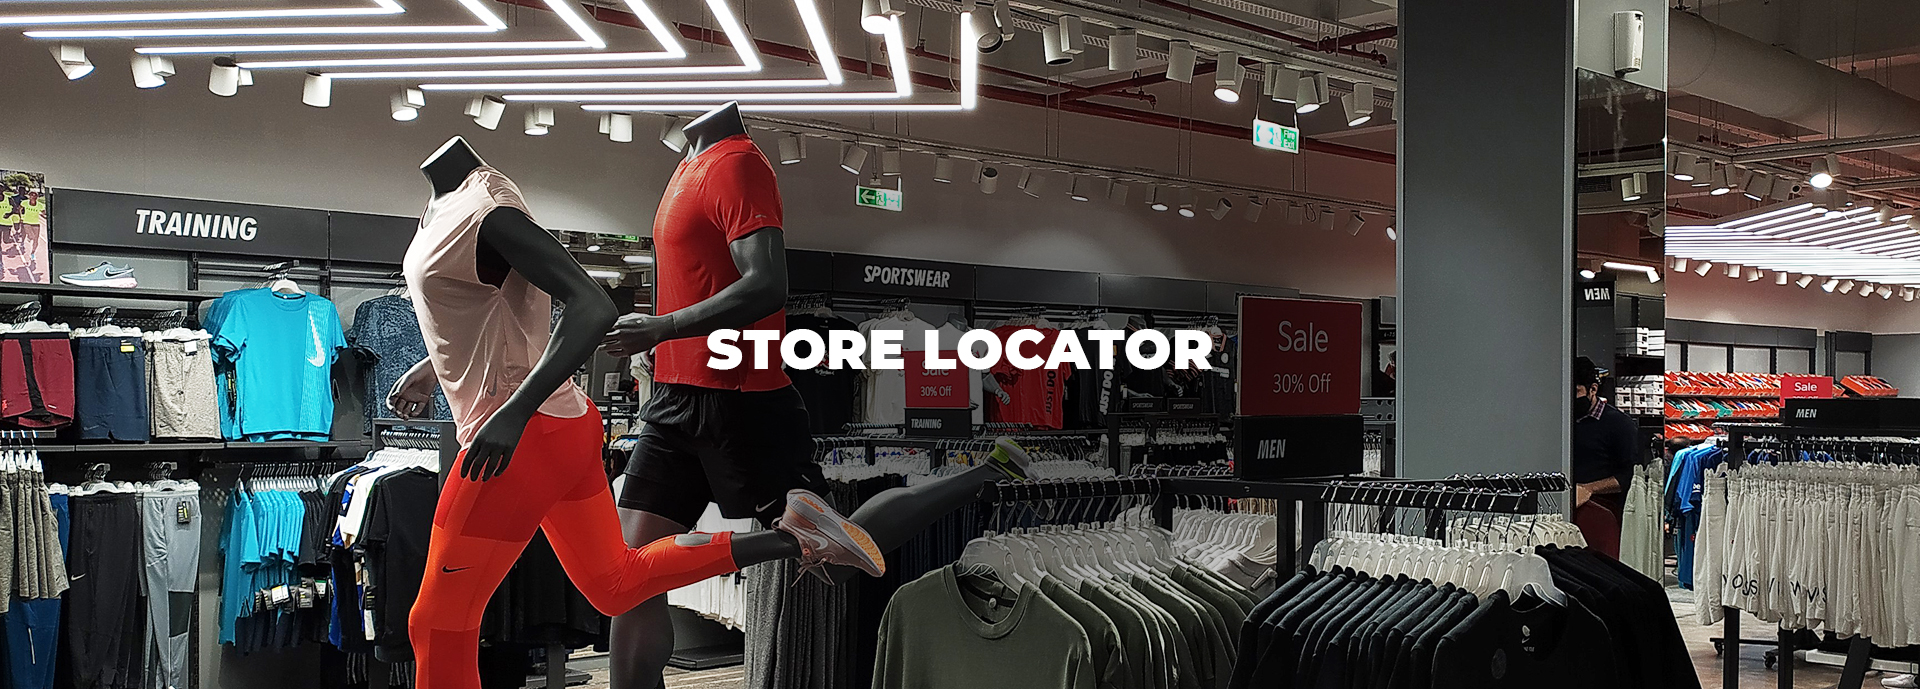 Outlet Store Locator